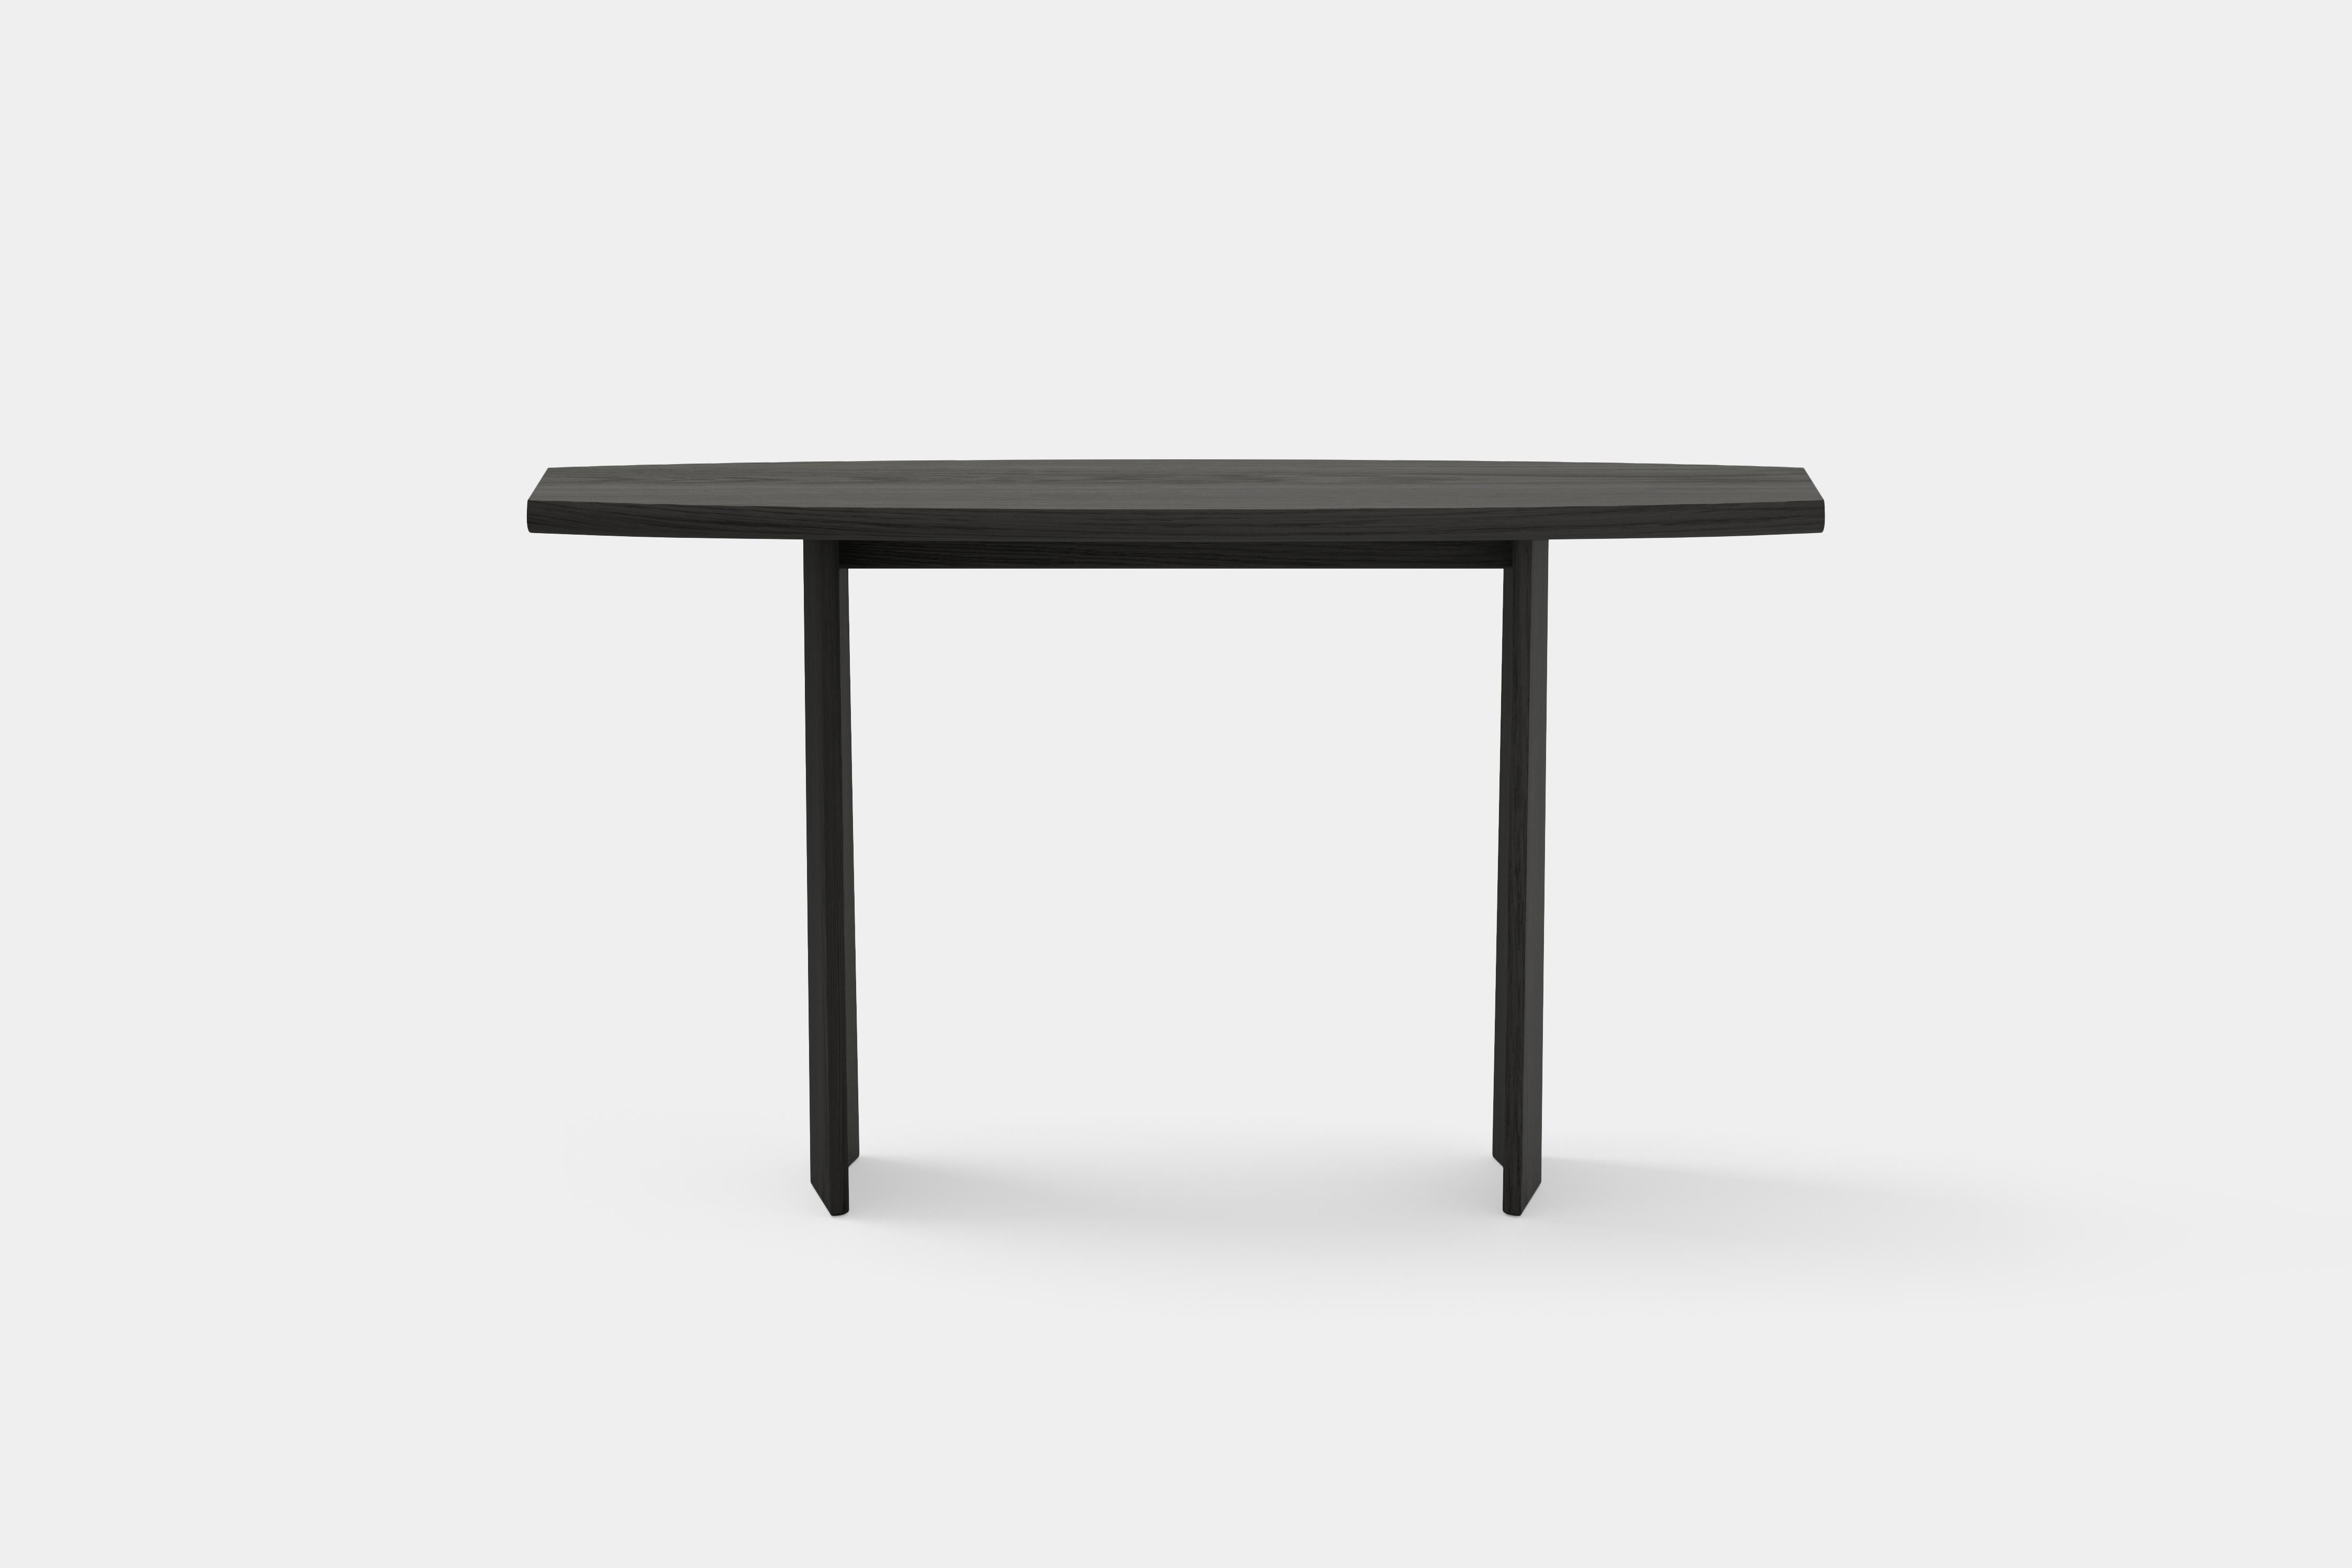 Peana Console Table in Black Tinted Wood Finish, Sideboard by Joel Escalona (Mexikanisch) im Angebot